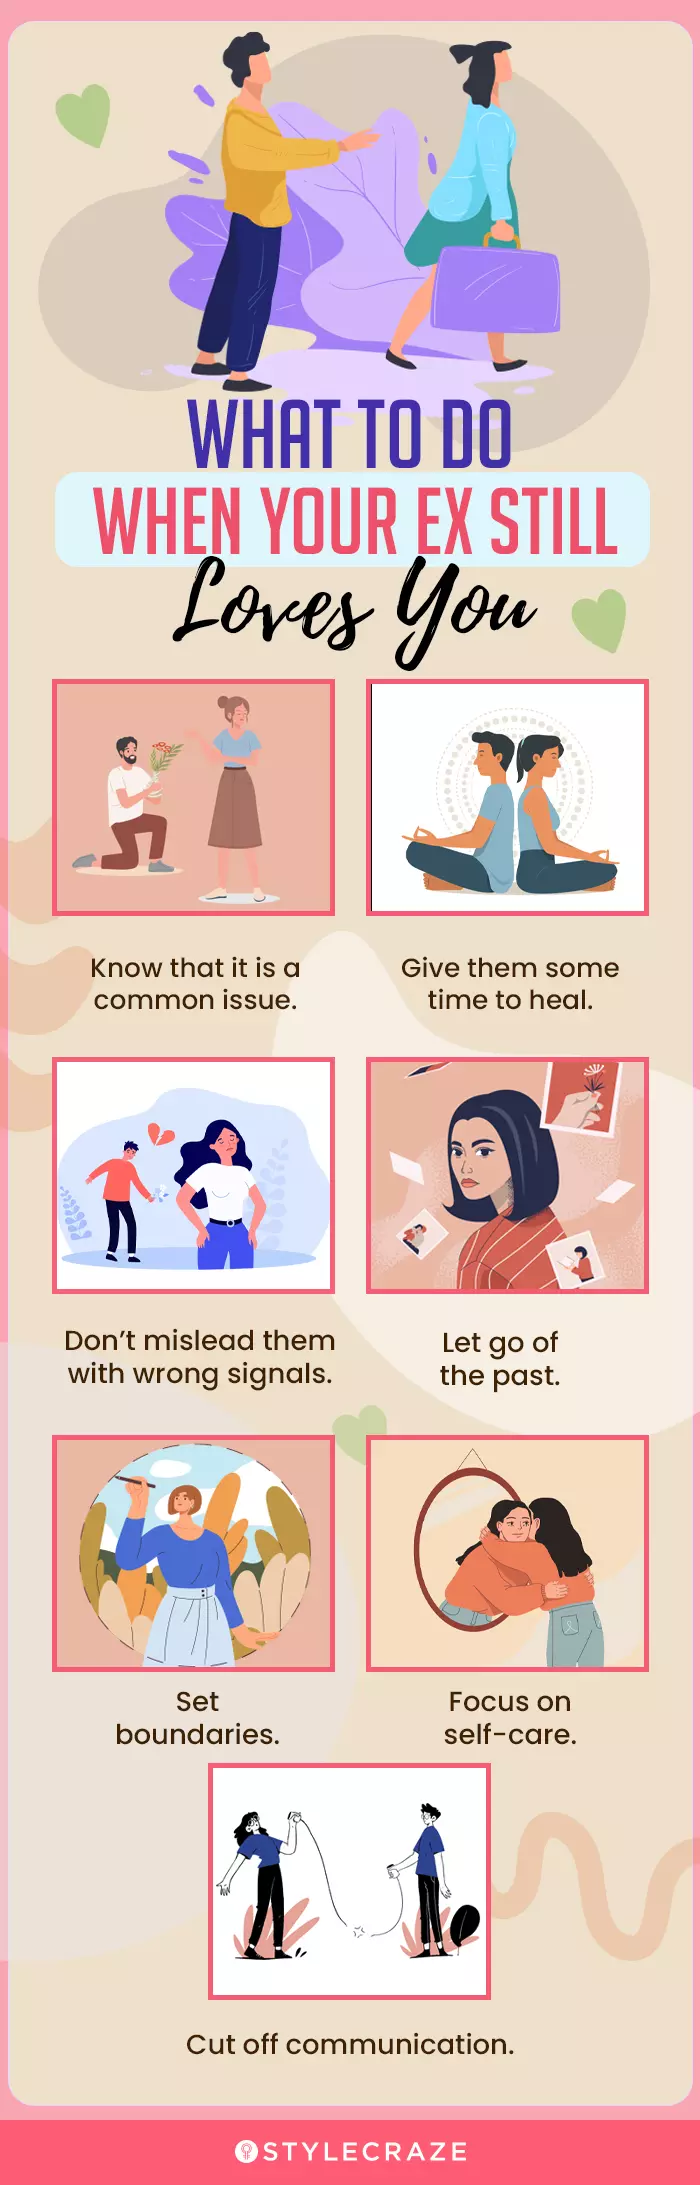 what to do when your ex still loves you (infographic)